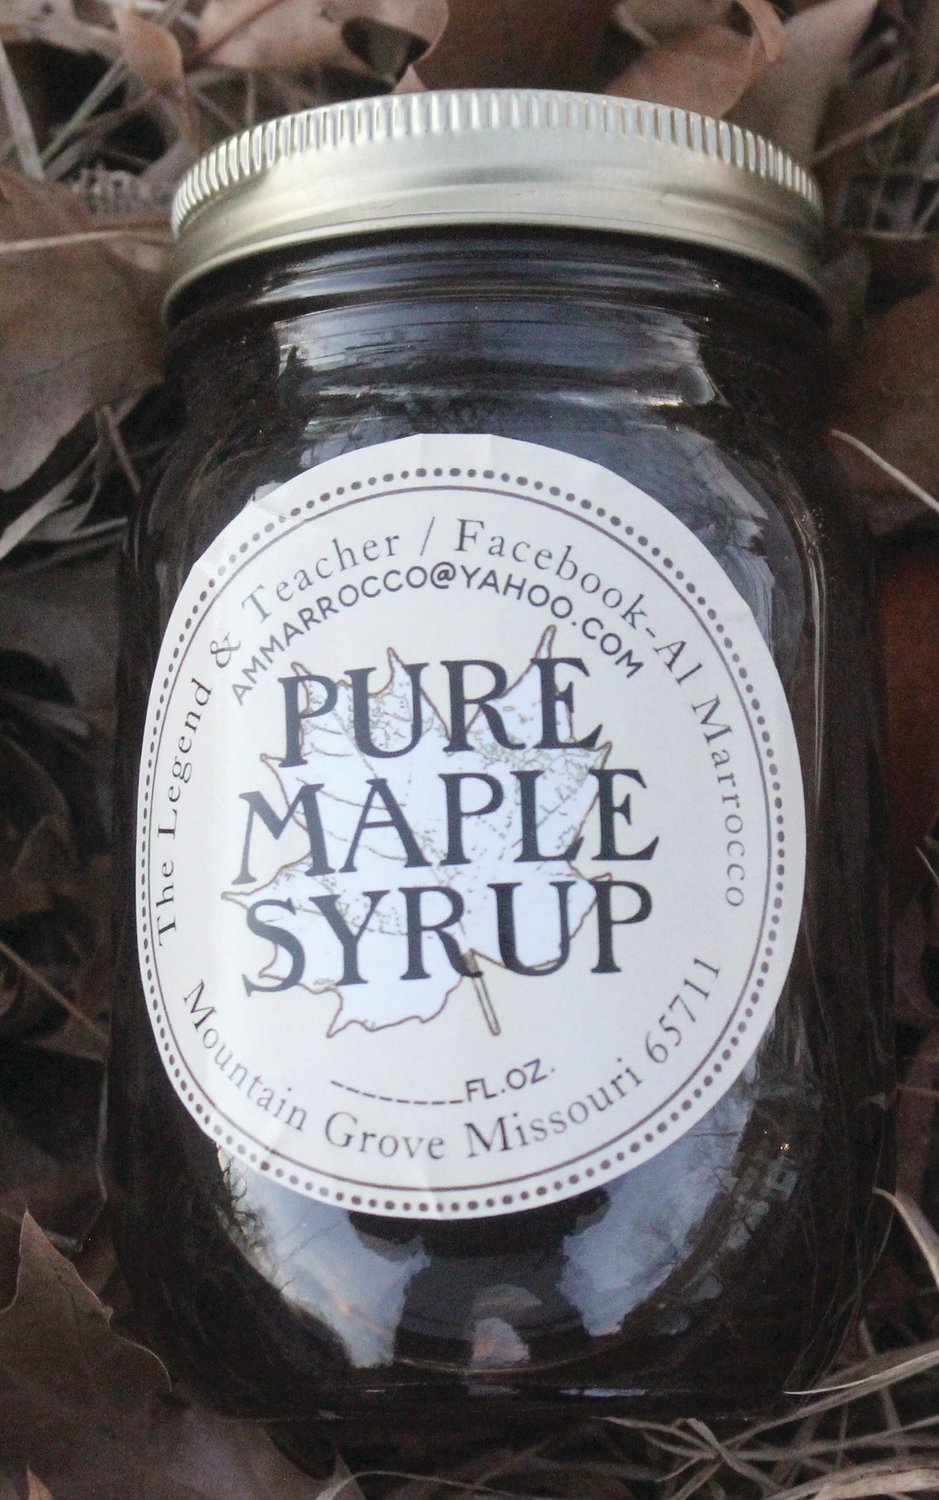 Allen Marrocco’s Pure Maple Syrup label on a jar of maple syrup.